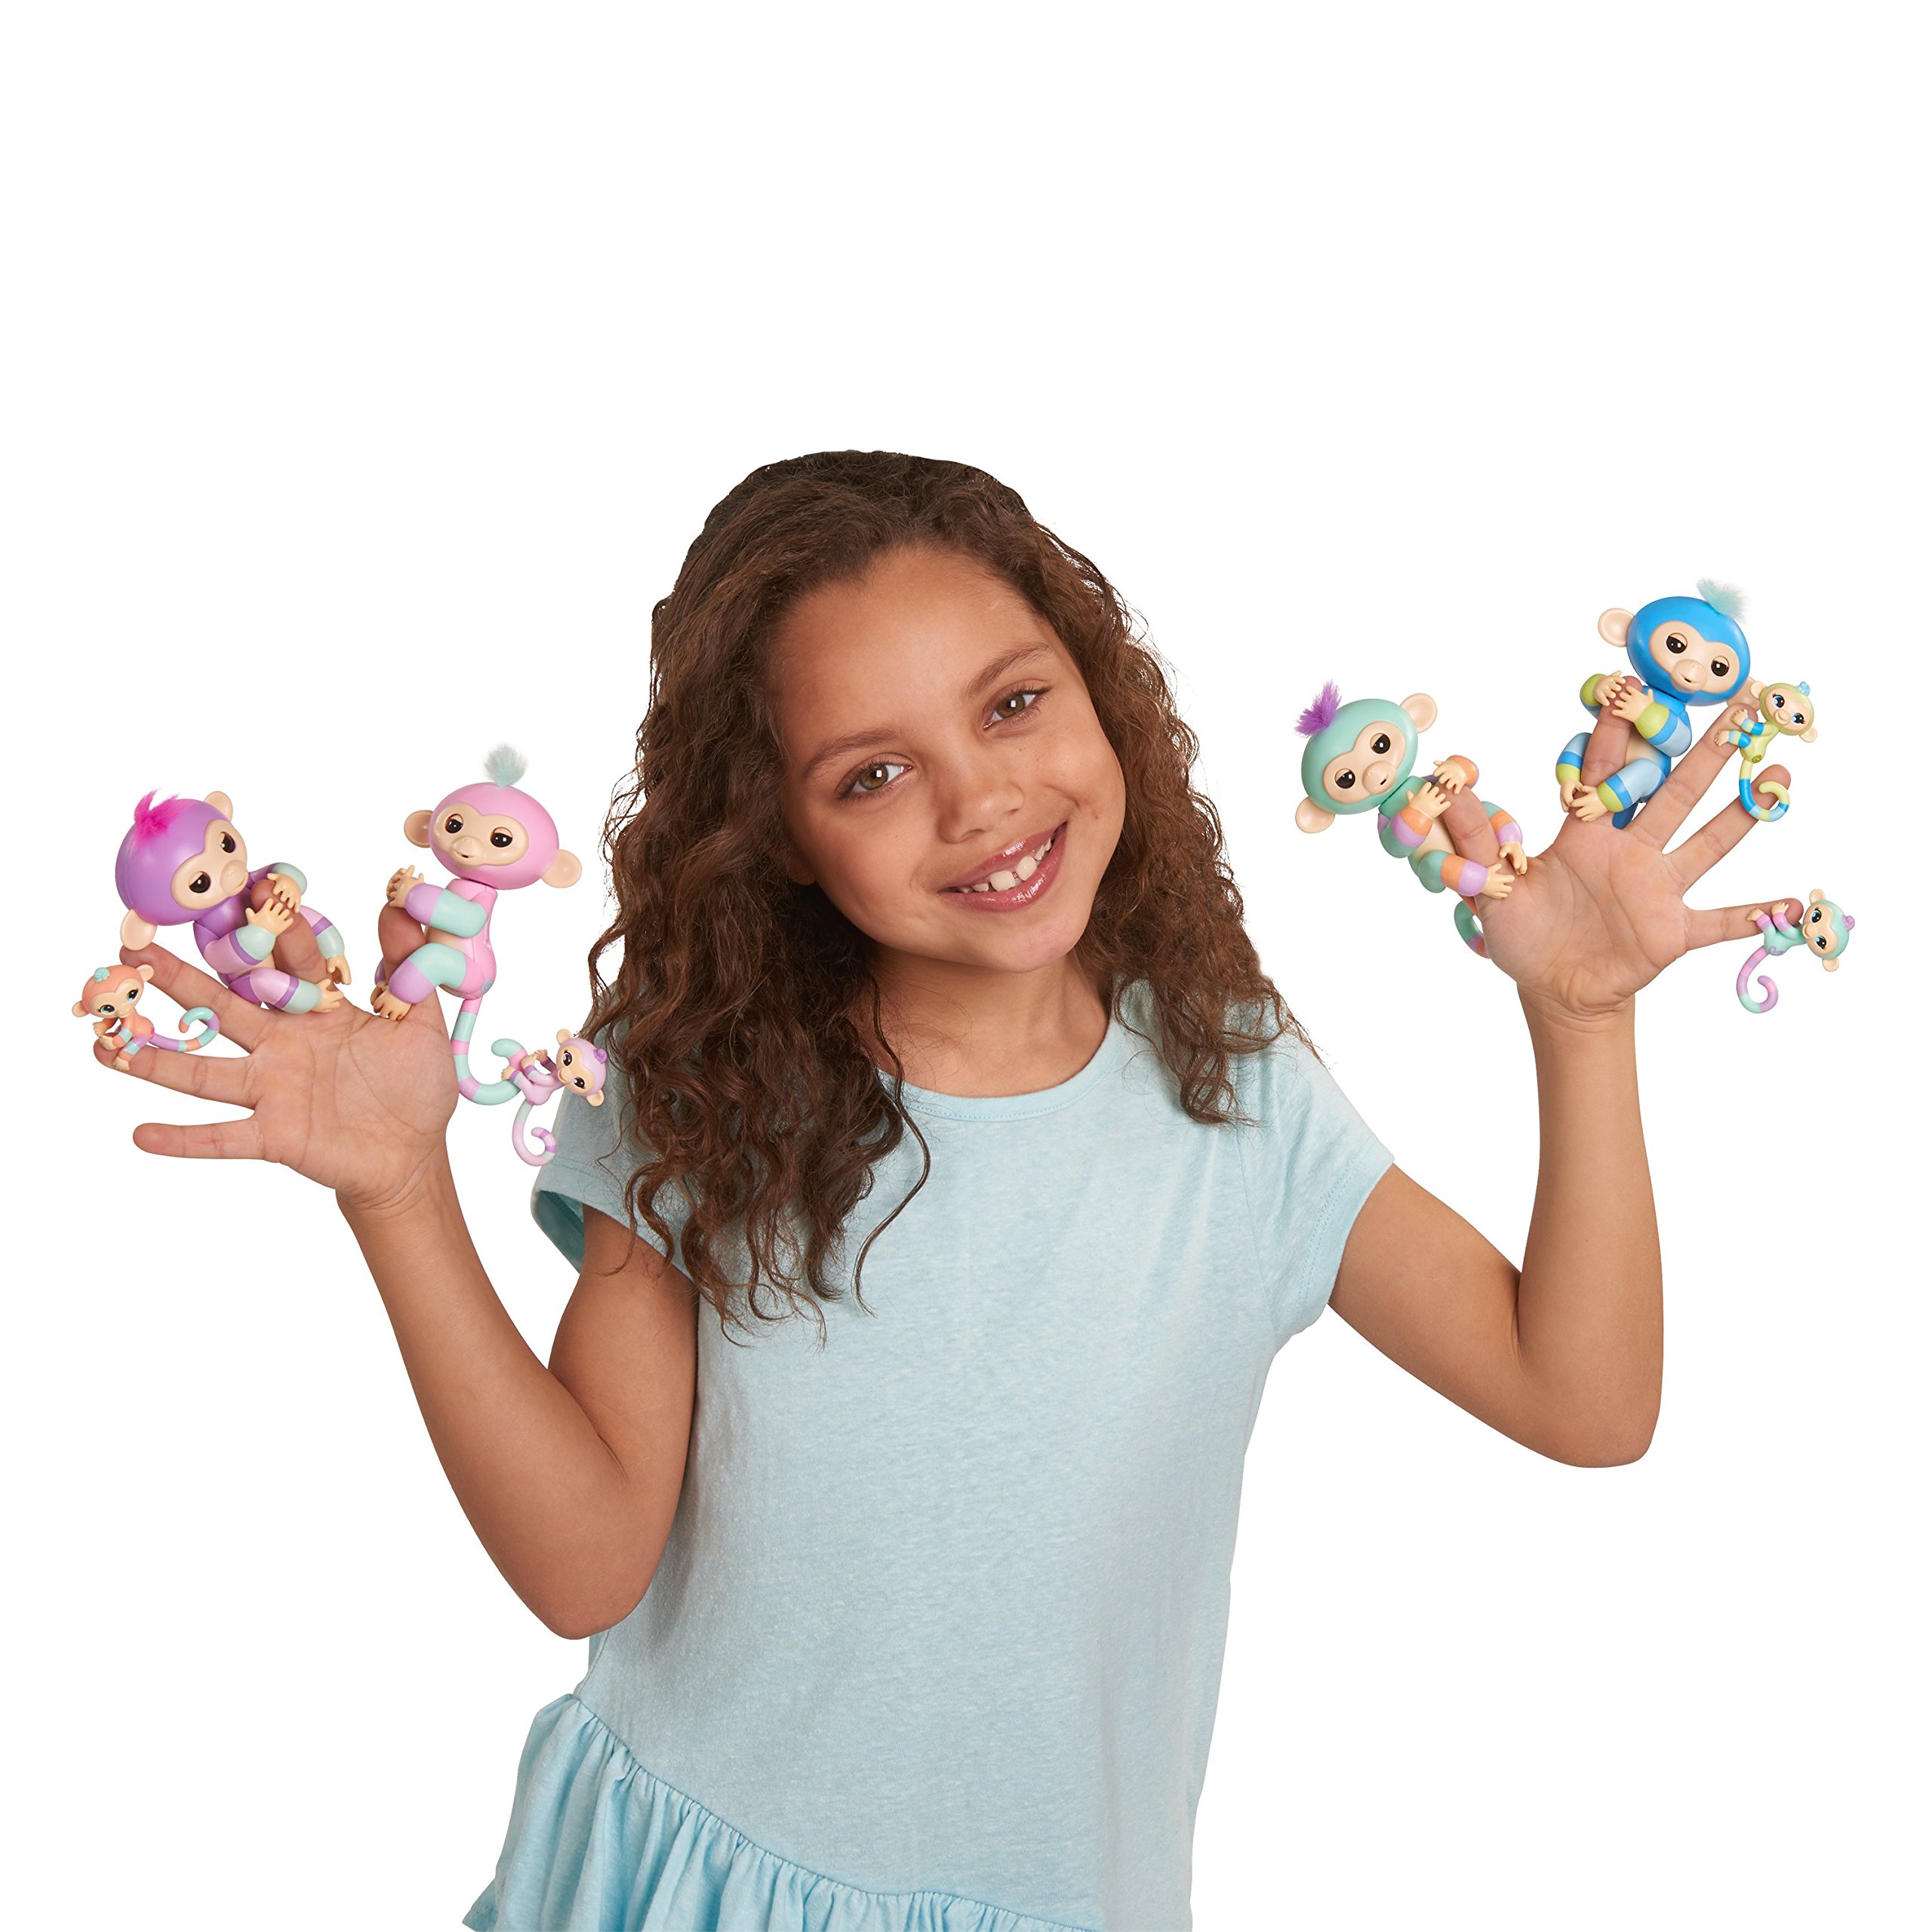 The Coolest Fingerlings Interact with Amazing Results | SantaBILT®